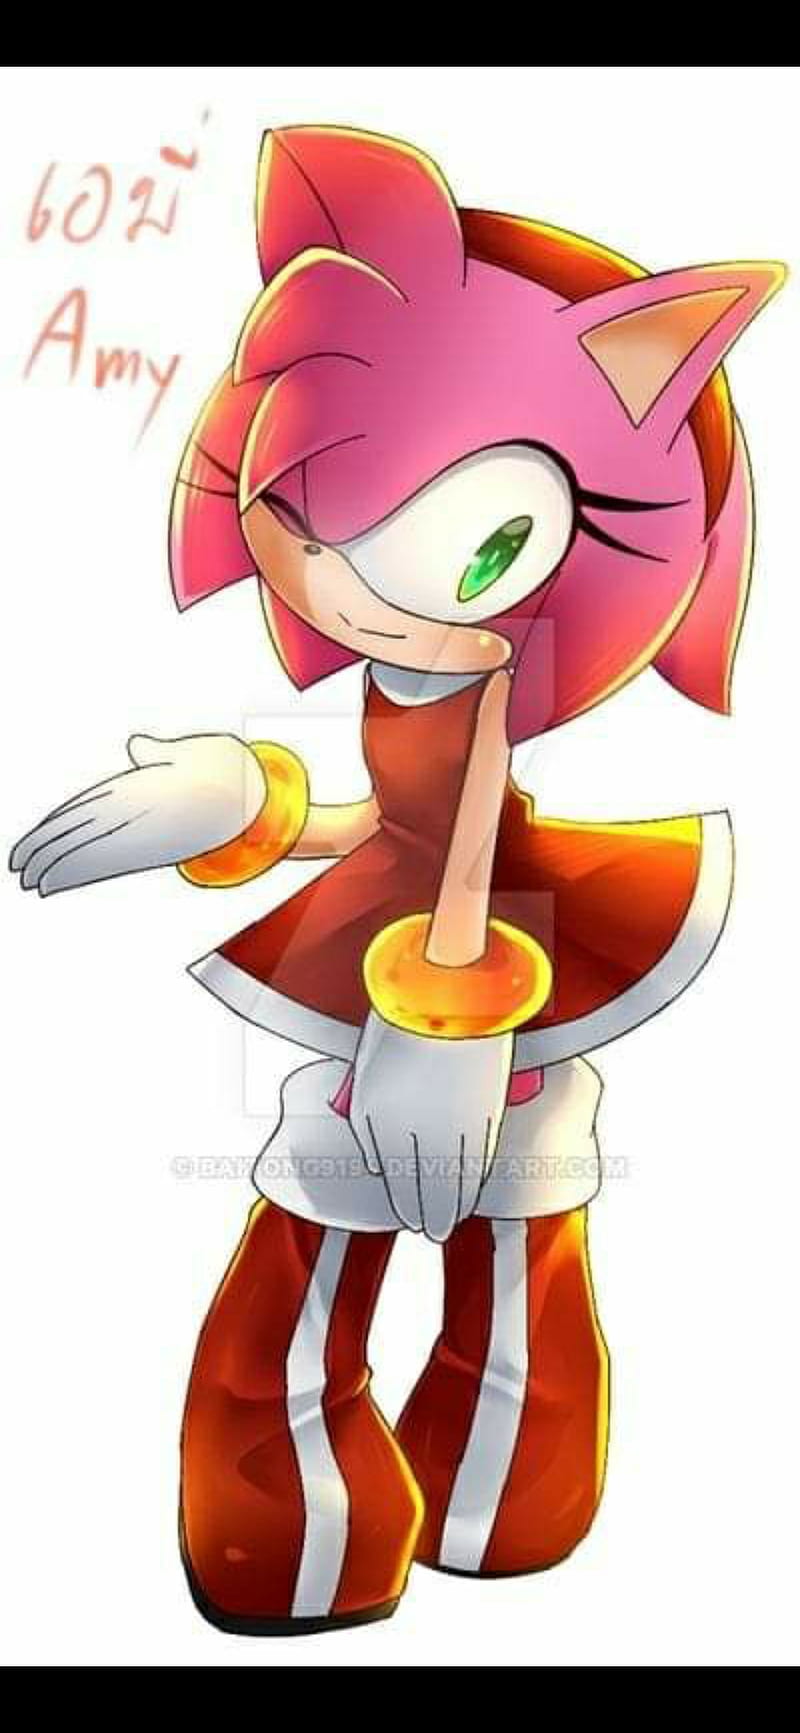 Wallpaper ID 416361  Video Game Sonic the Hedgehog Phone Wallpaper  Classic Sonic Amy Rose 1080x1920 free download